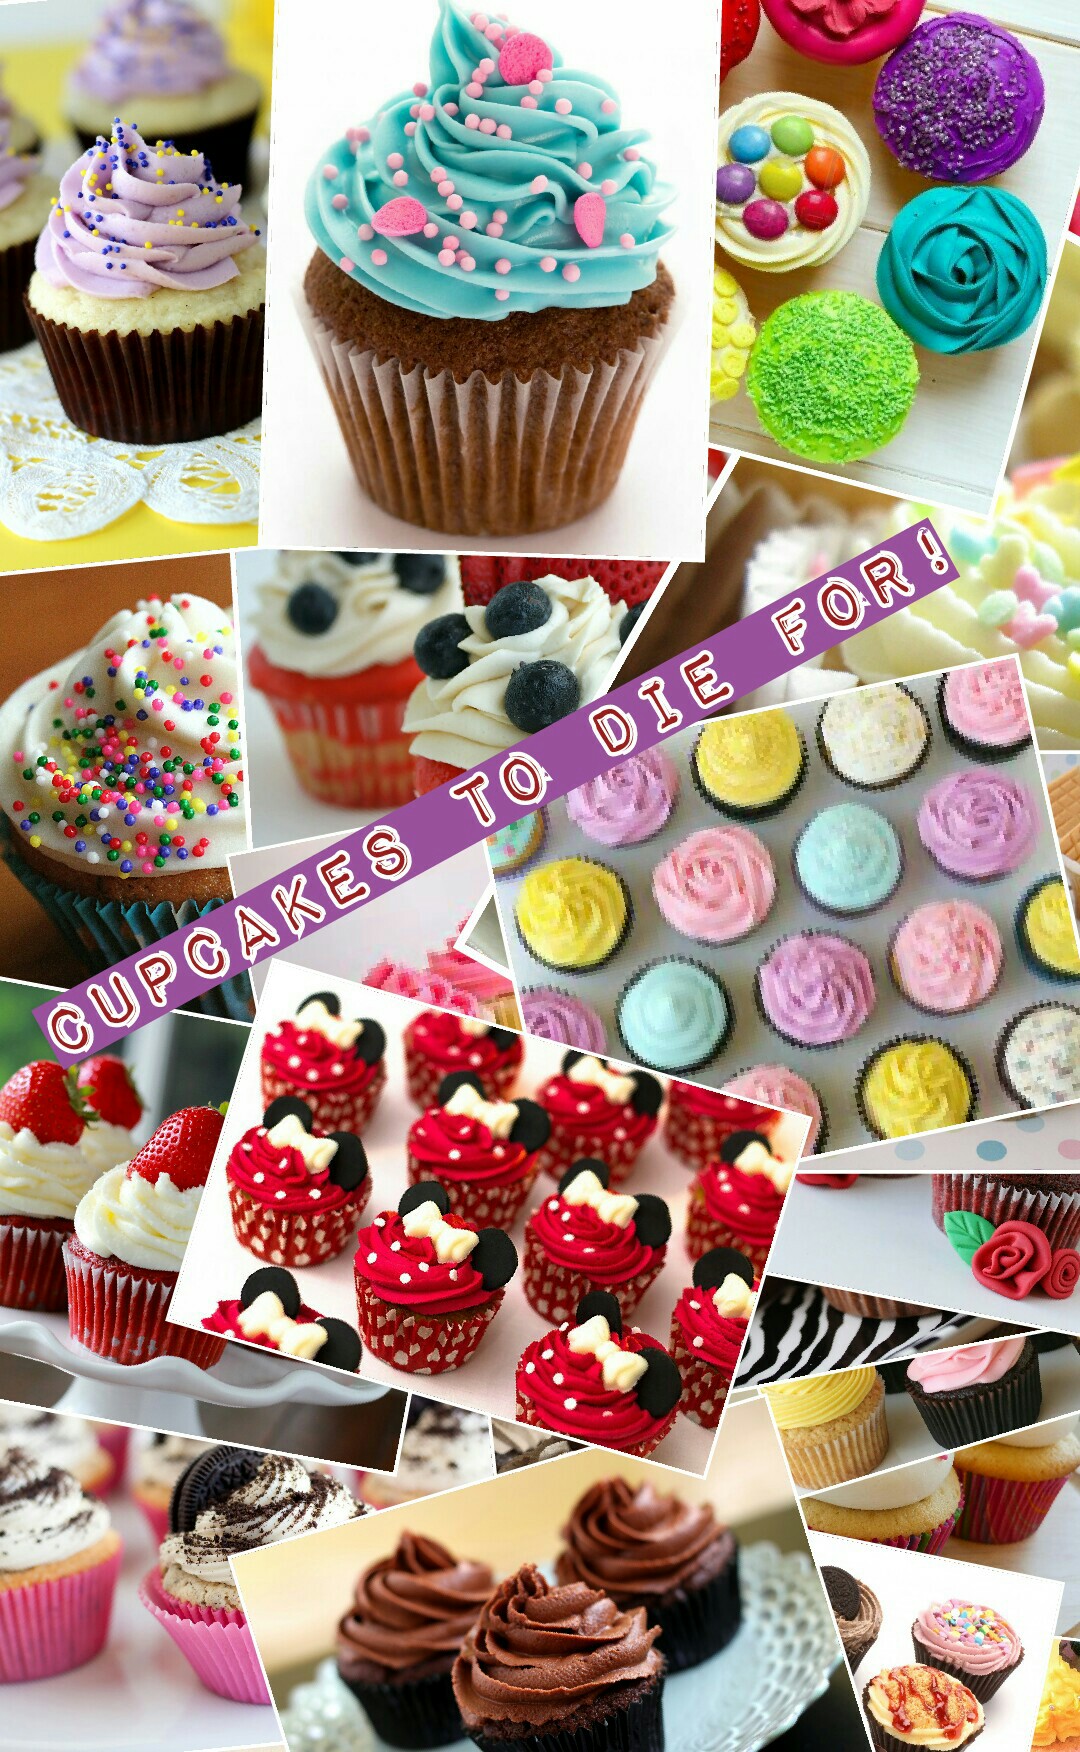 Cupcakes to die for!☺